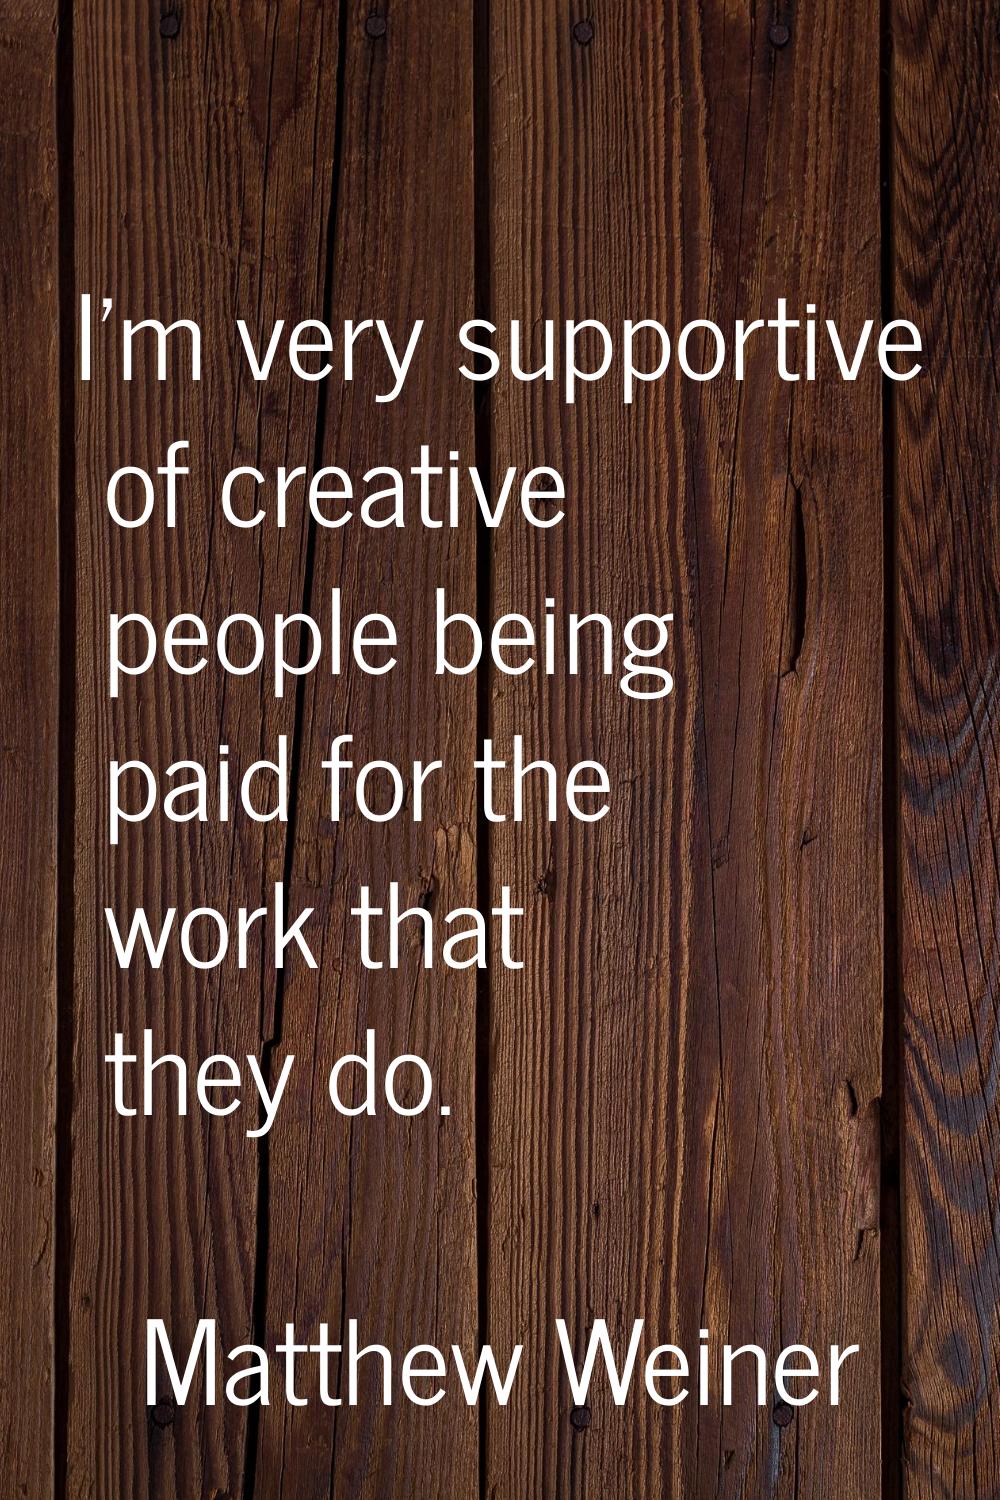 I'm very supportive of creative people being paid for the work that they do.